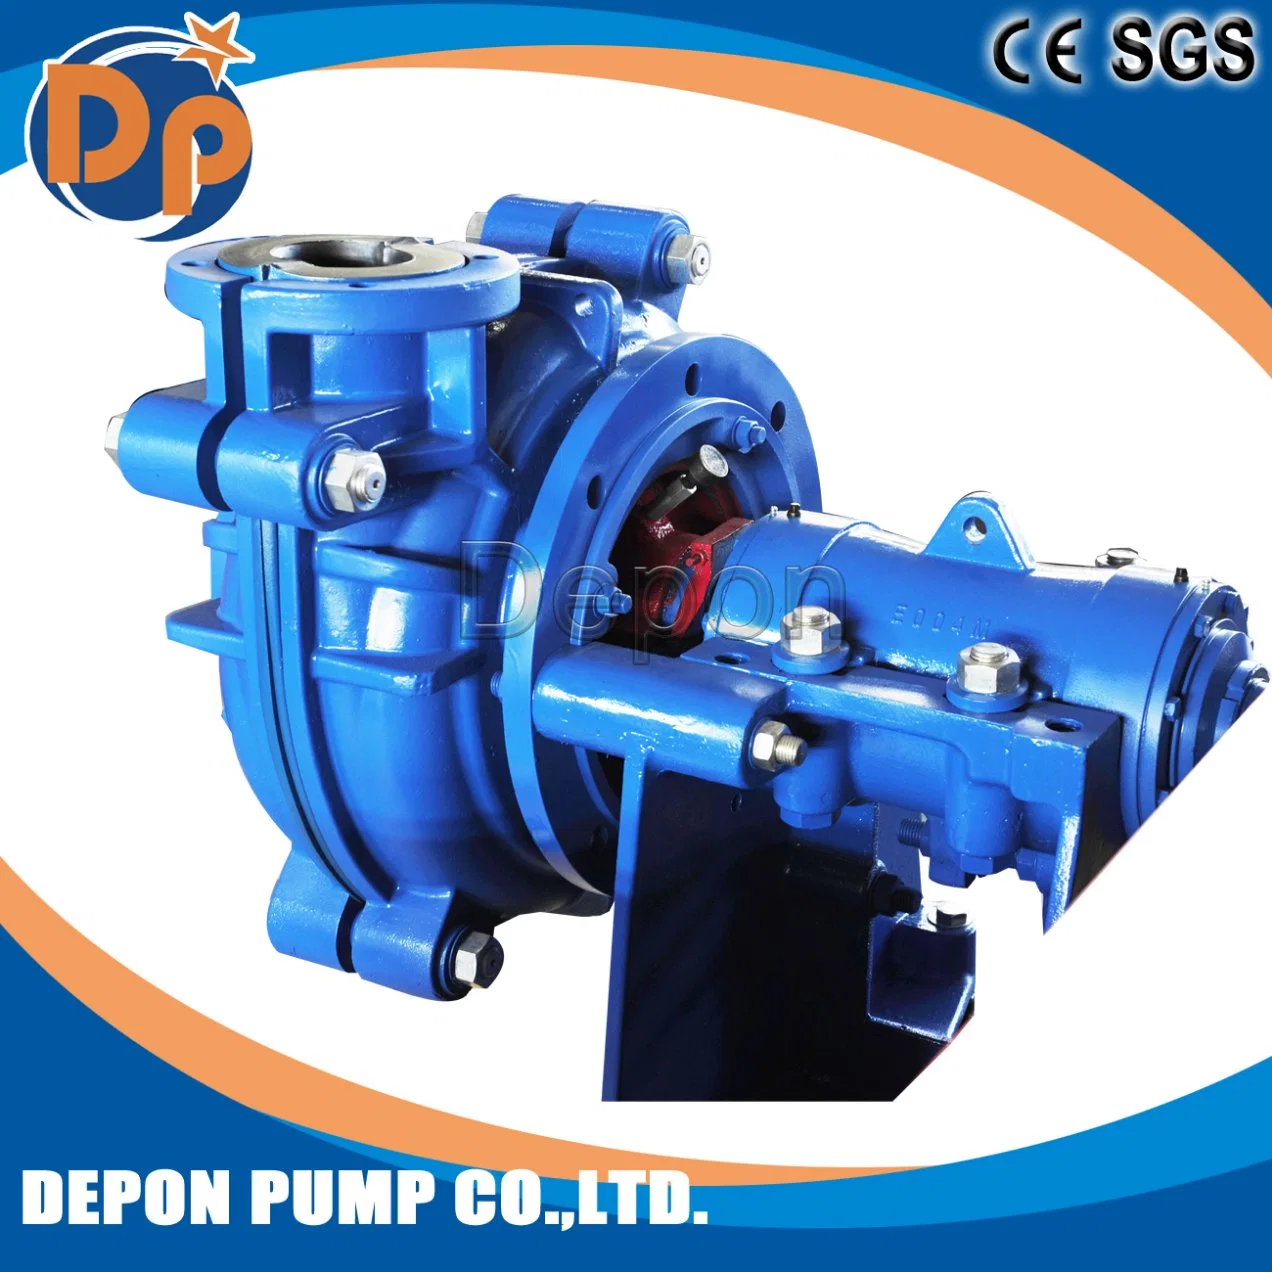 High Head High Pressure Slurry with Closed Impeller for Mining Slurry Horizontal Single Stage Centrifugal Pump